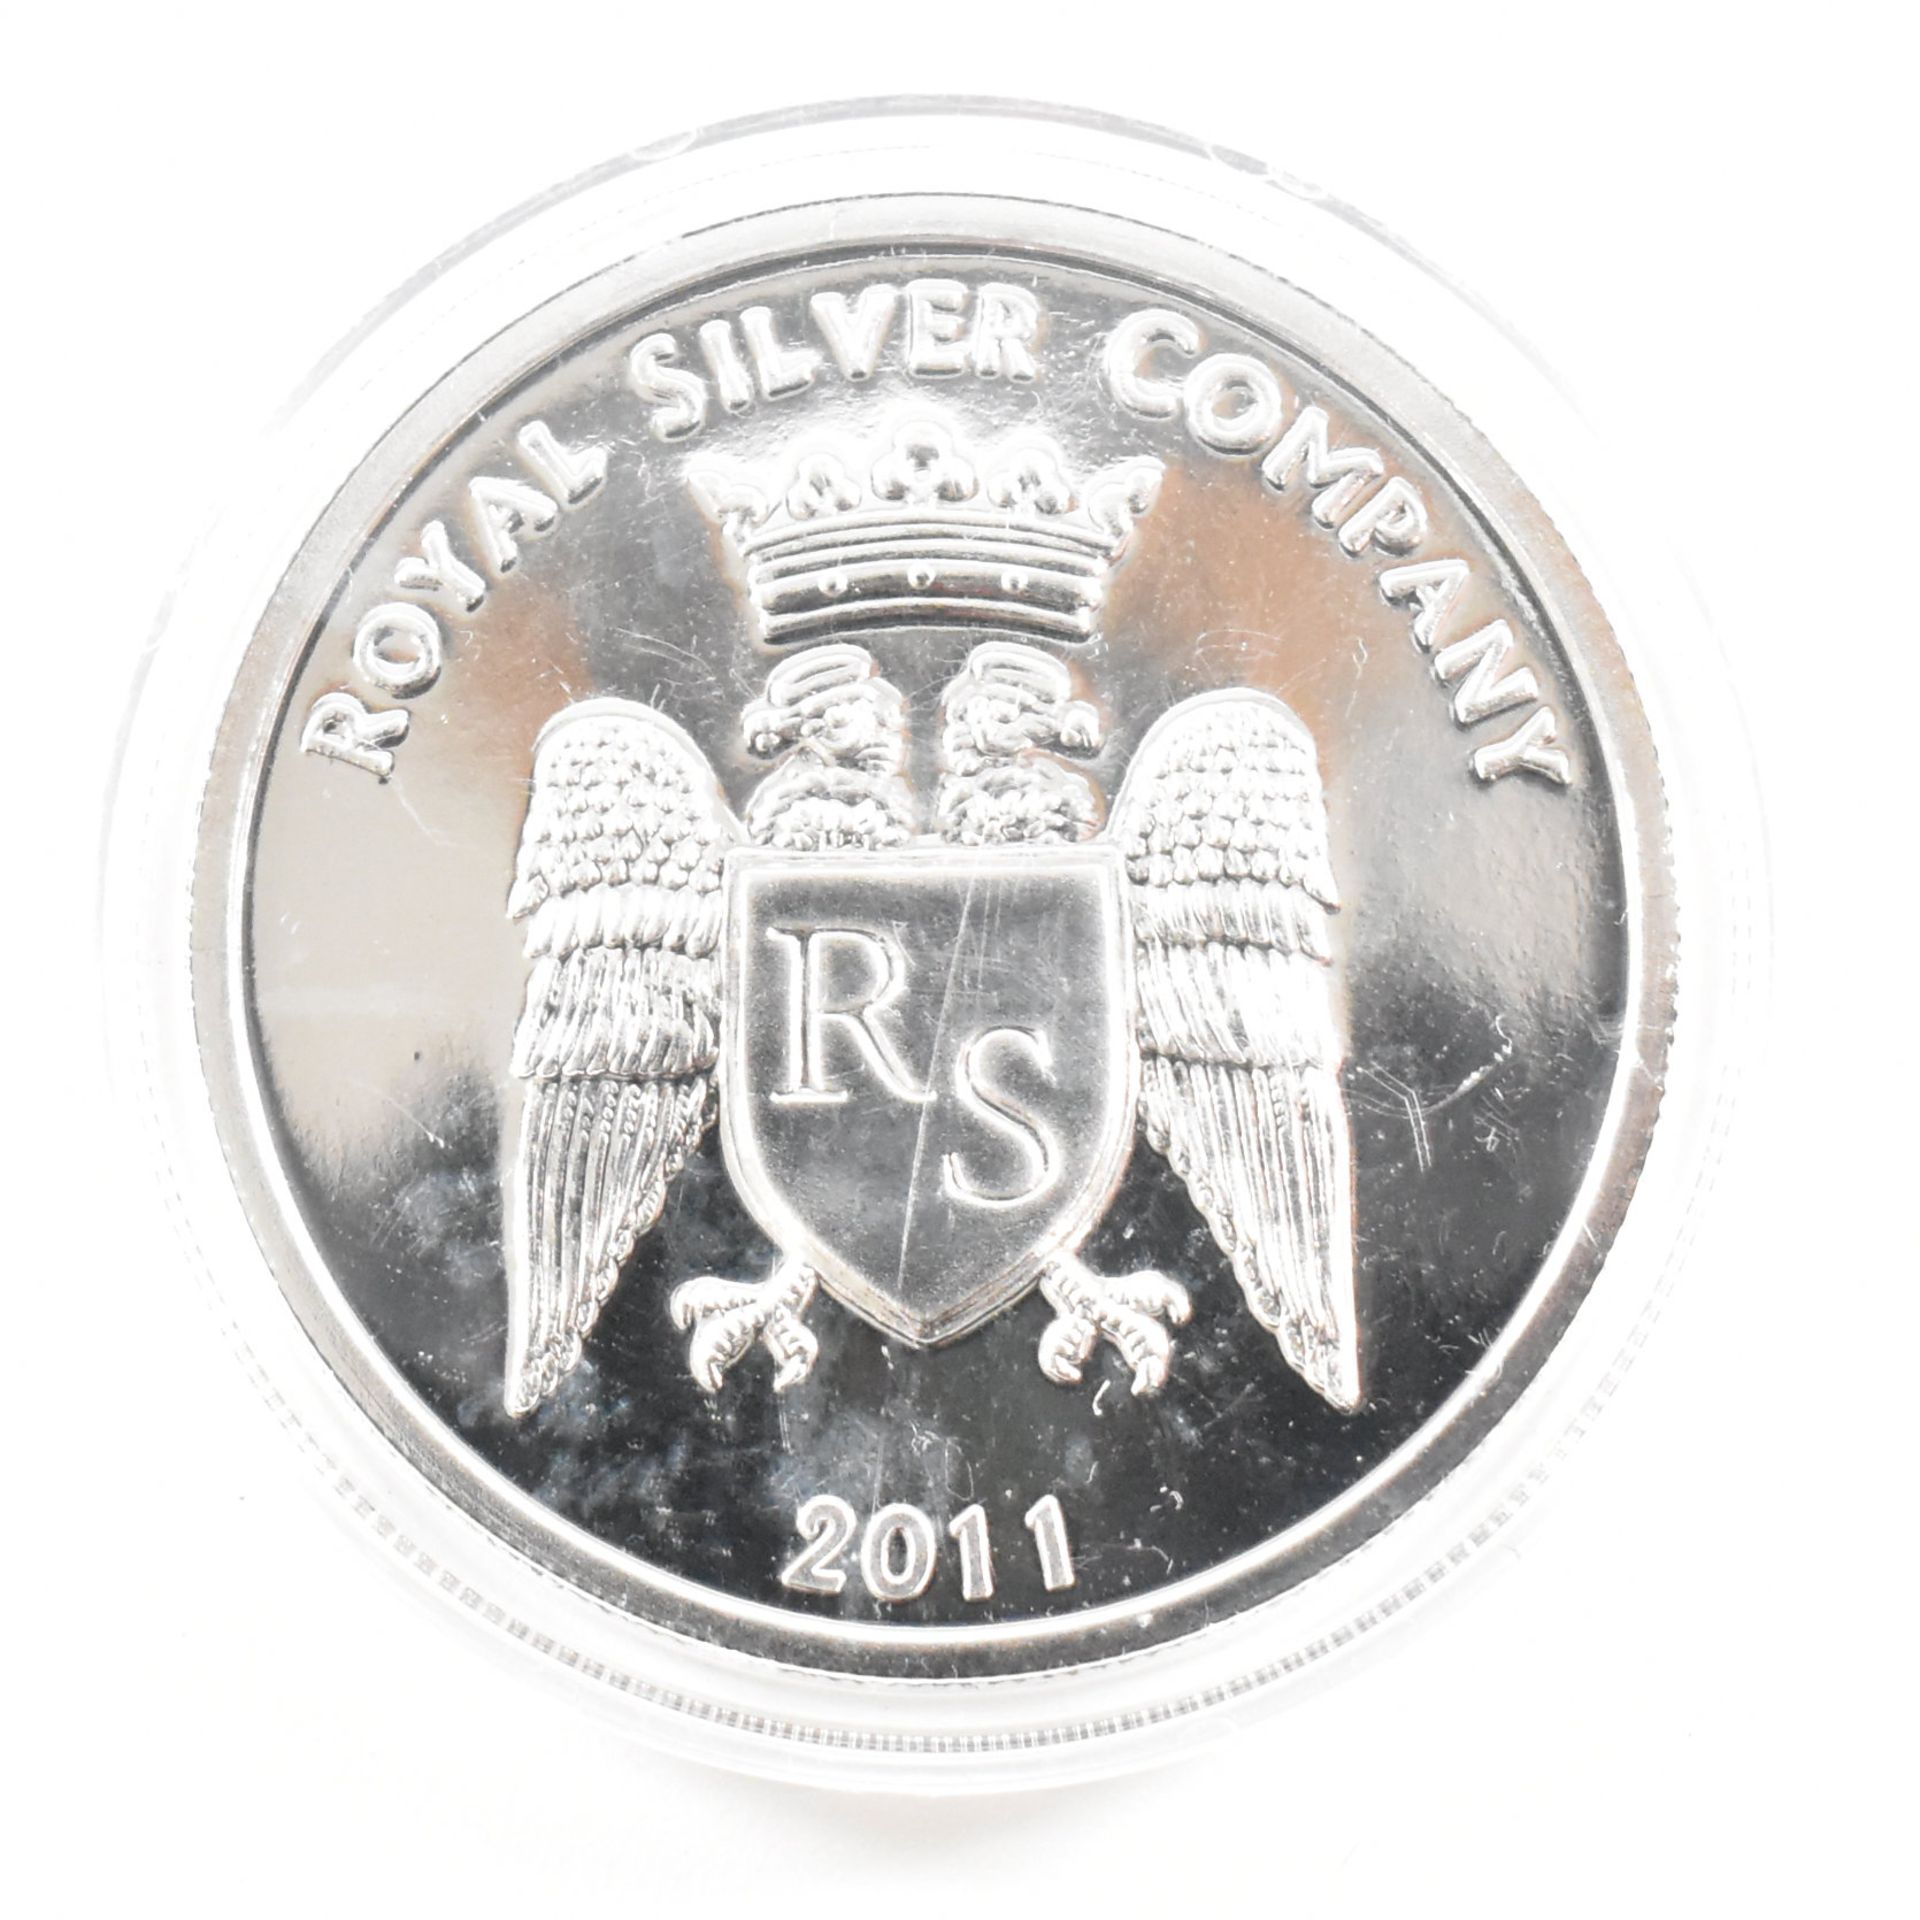 ONE 0Z 2011 ROYAL SILVER COMPANY COIN FINE SILVER - Image 2 of 4